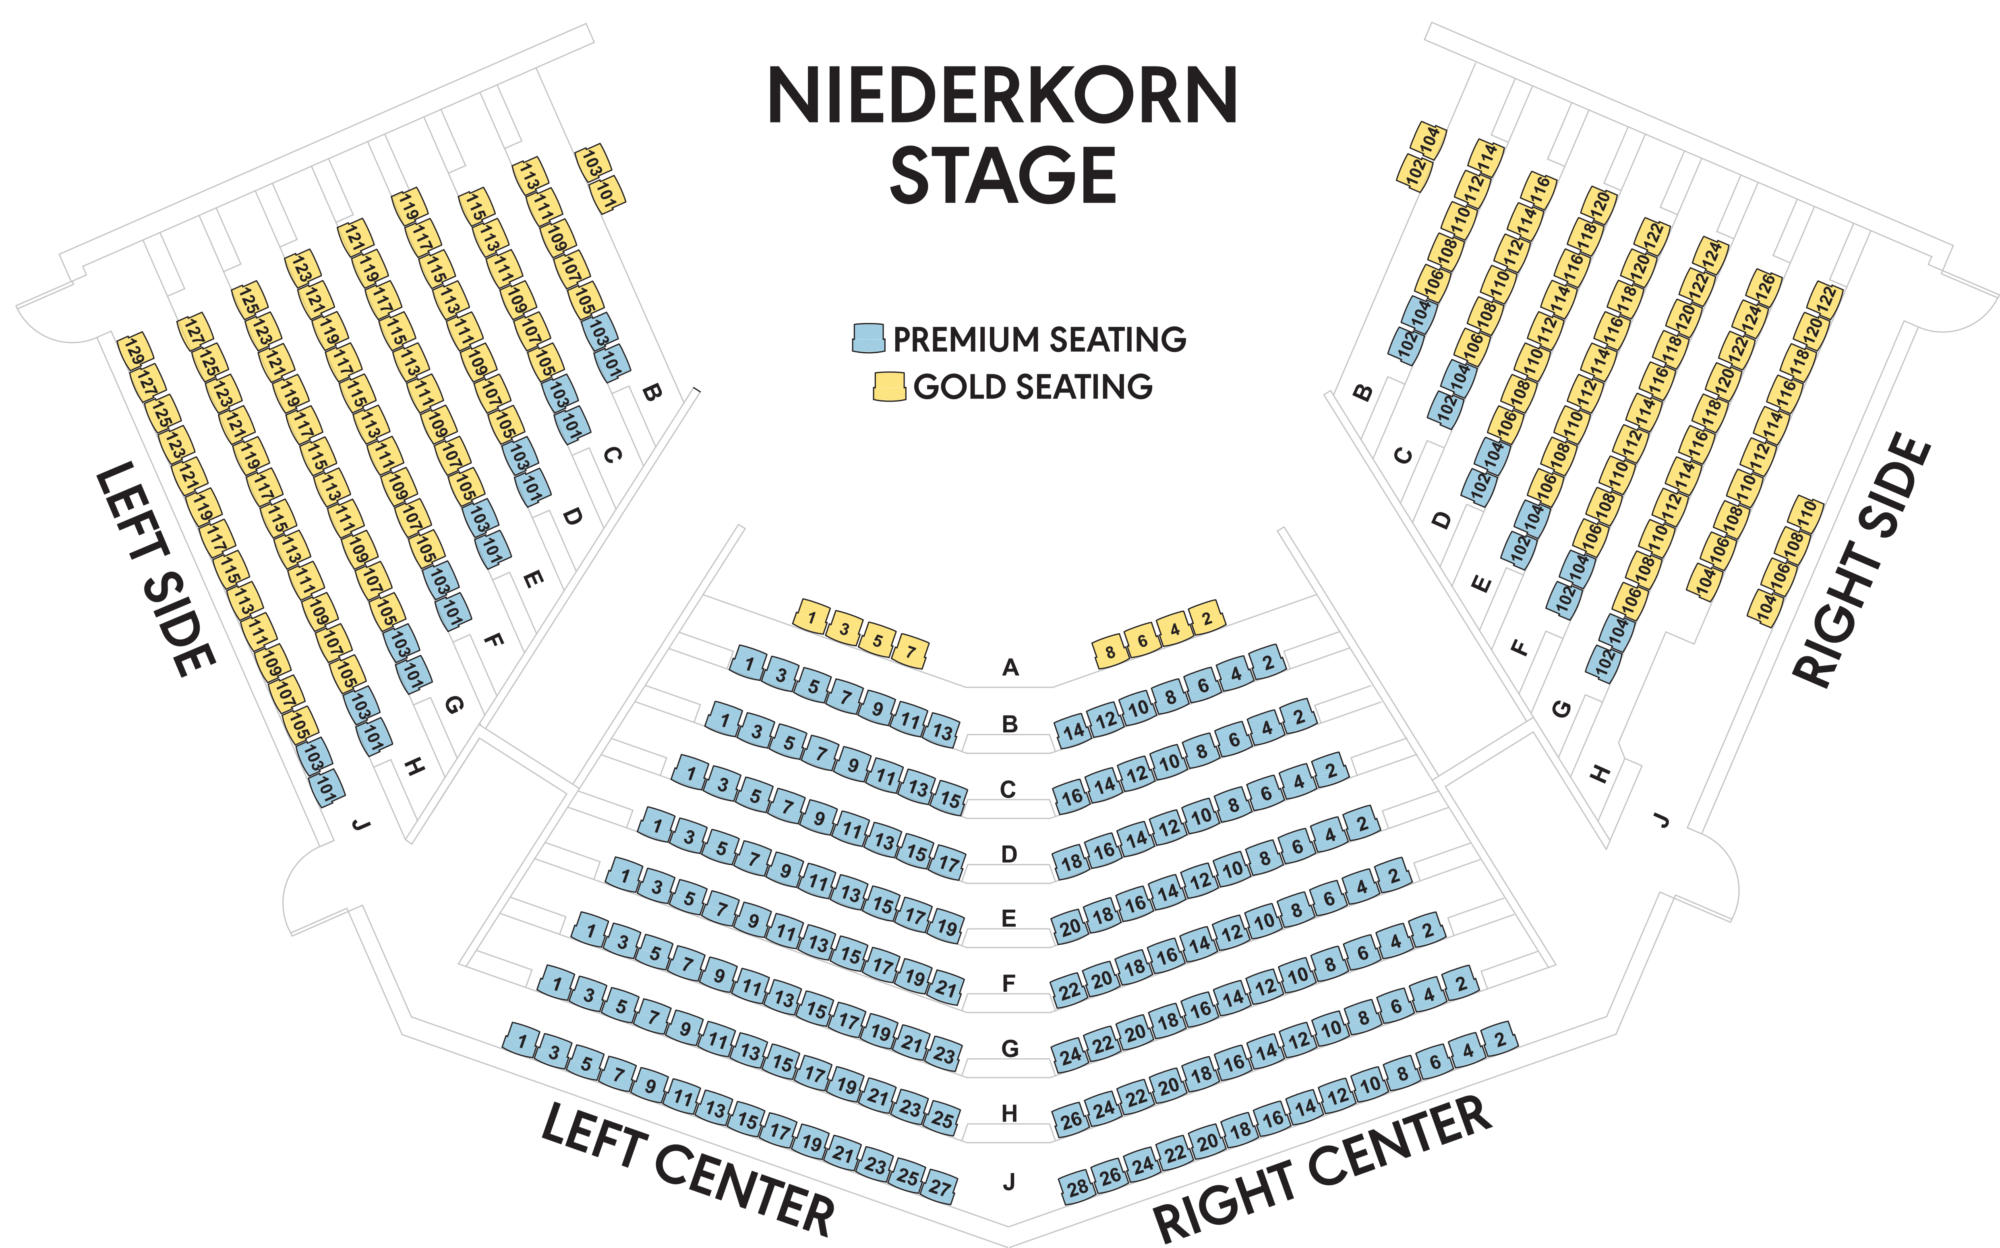 State Theater Ithaca Seating Chart